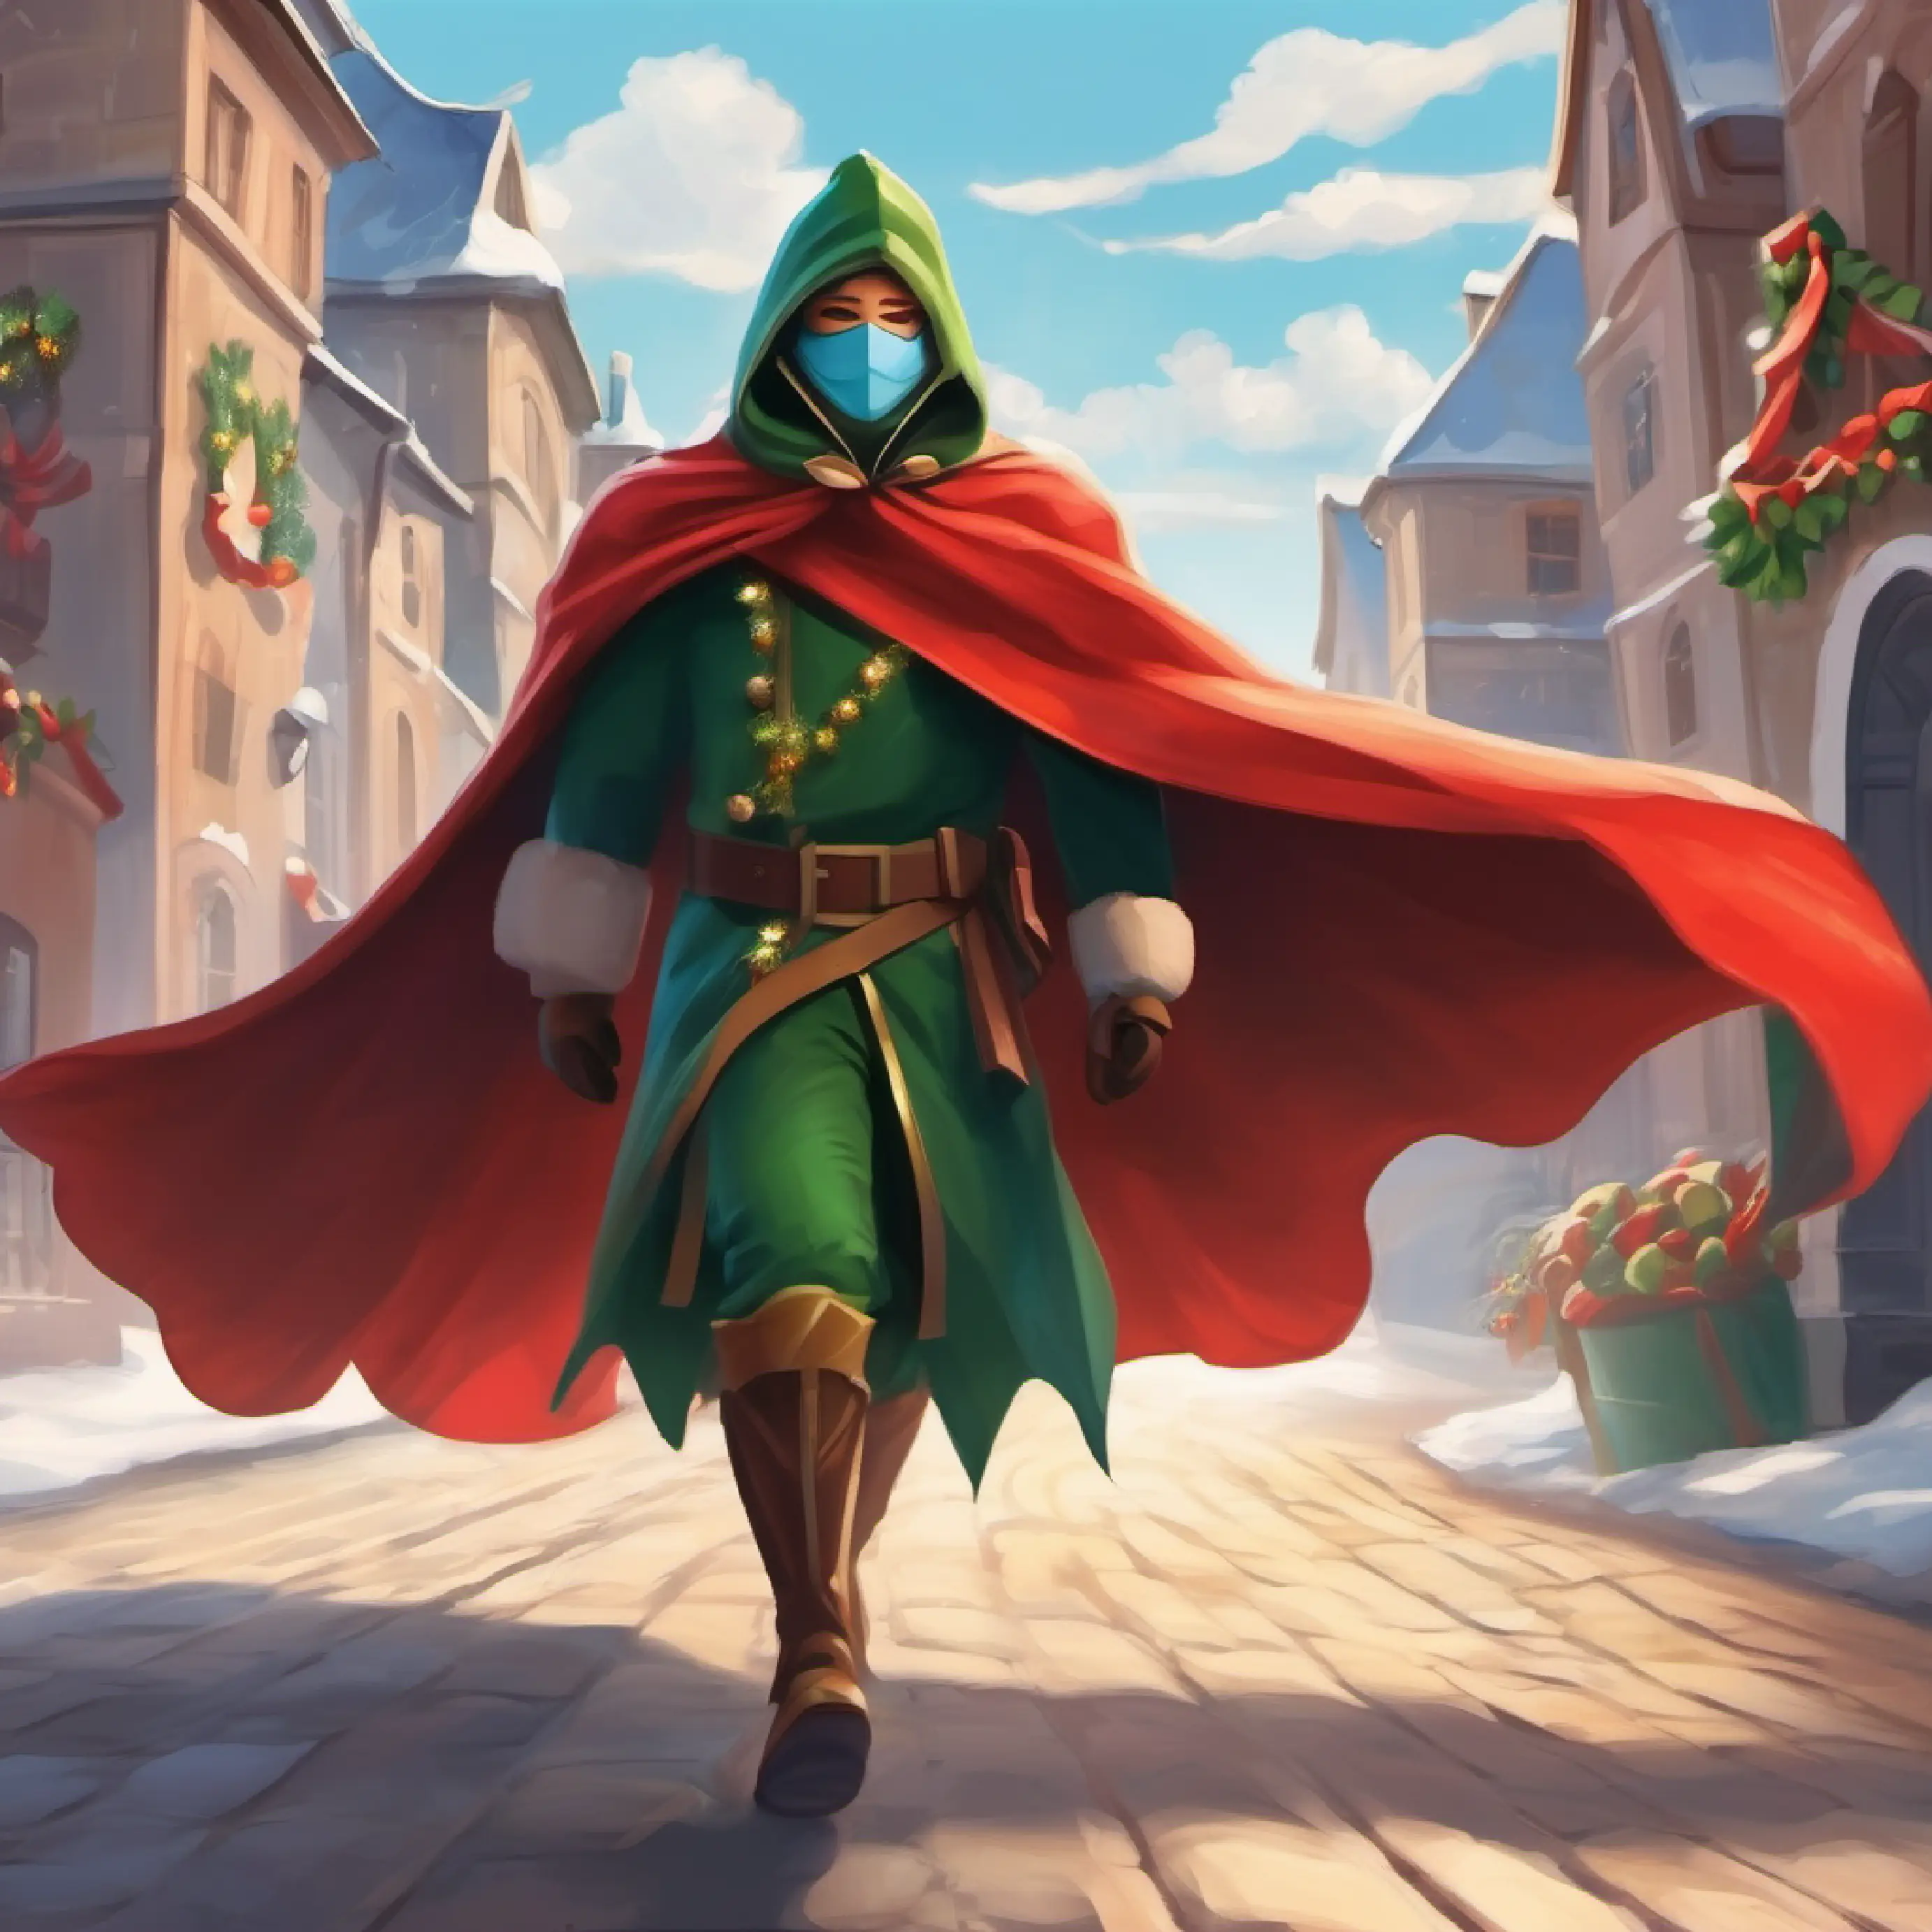 Heroic costume, masked, with cape fluttering like windswept leaves grows into his role as town's guardian.